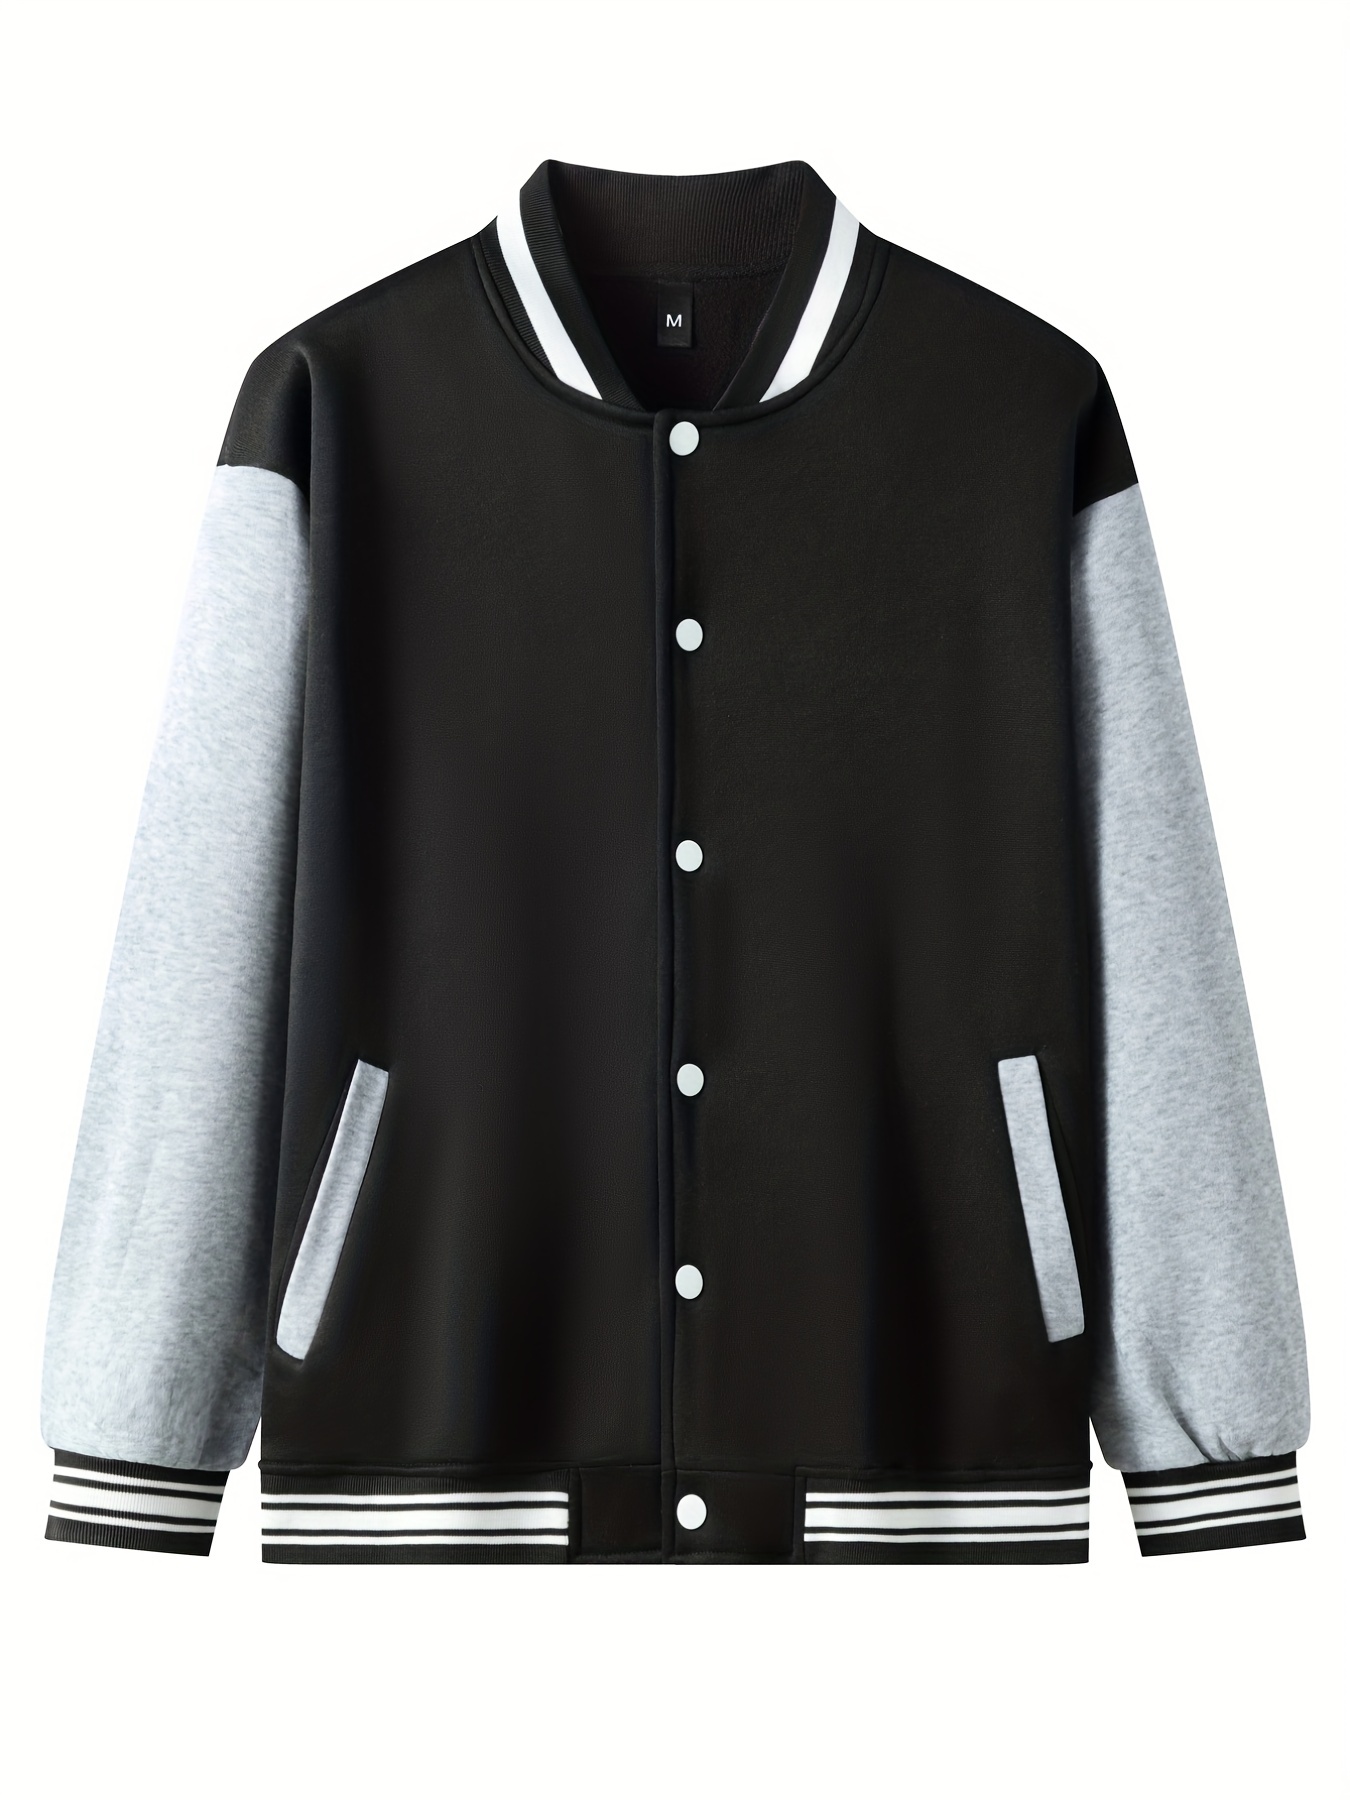 classic design varsity jacket mens casual color block button up jacket for spring fall school baseball details 0